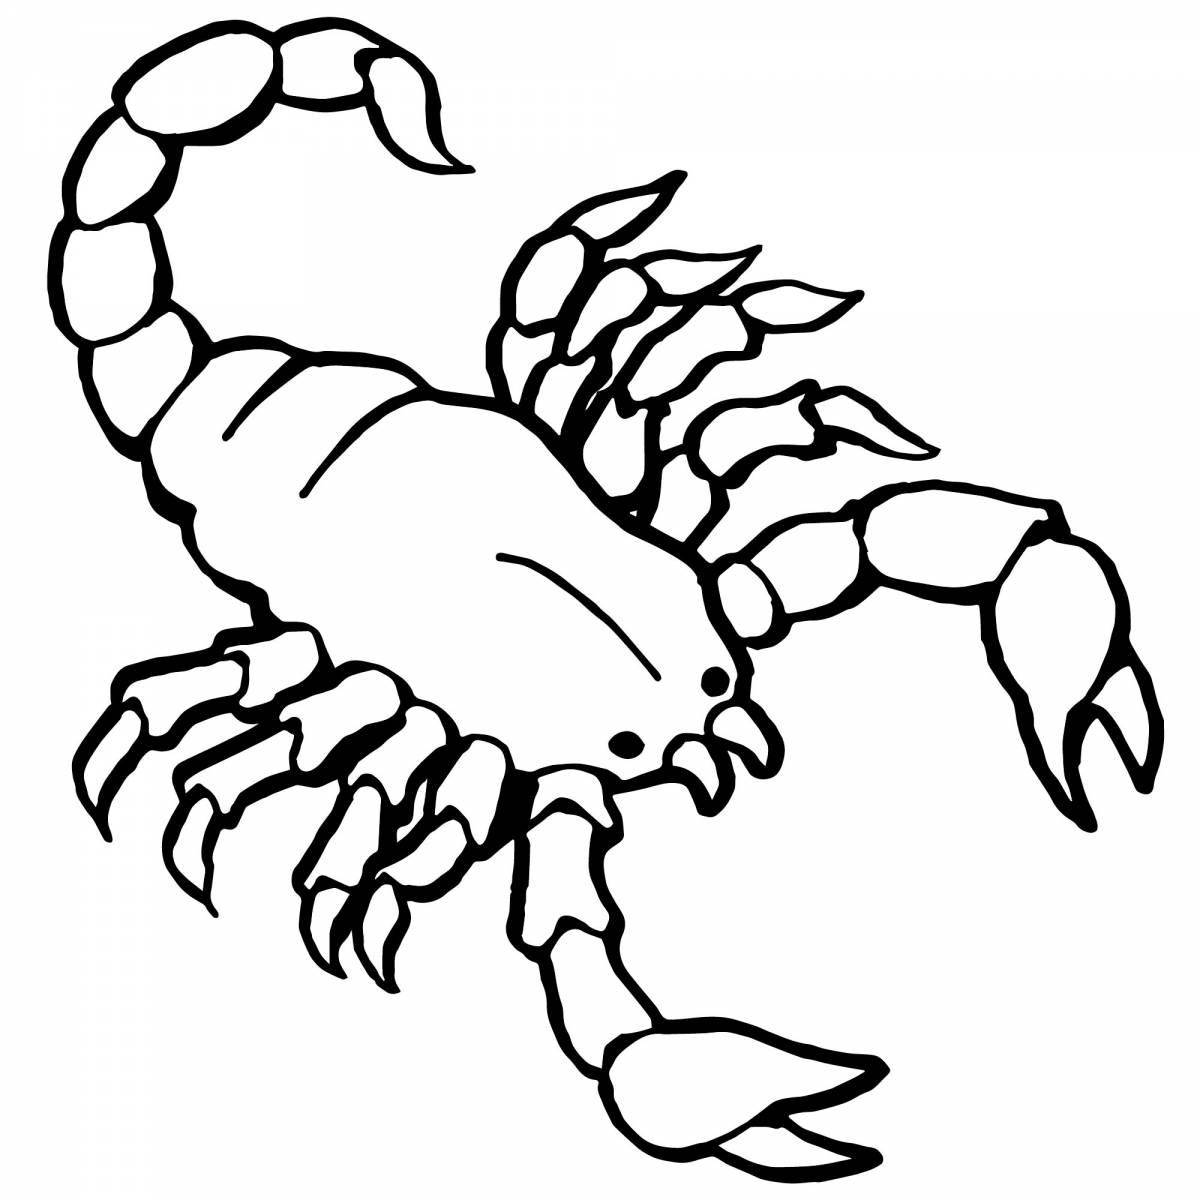 Courageous scorpion coloring page